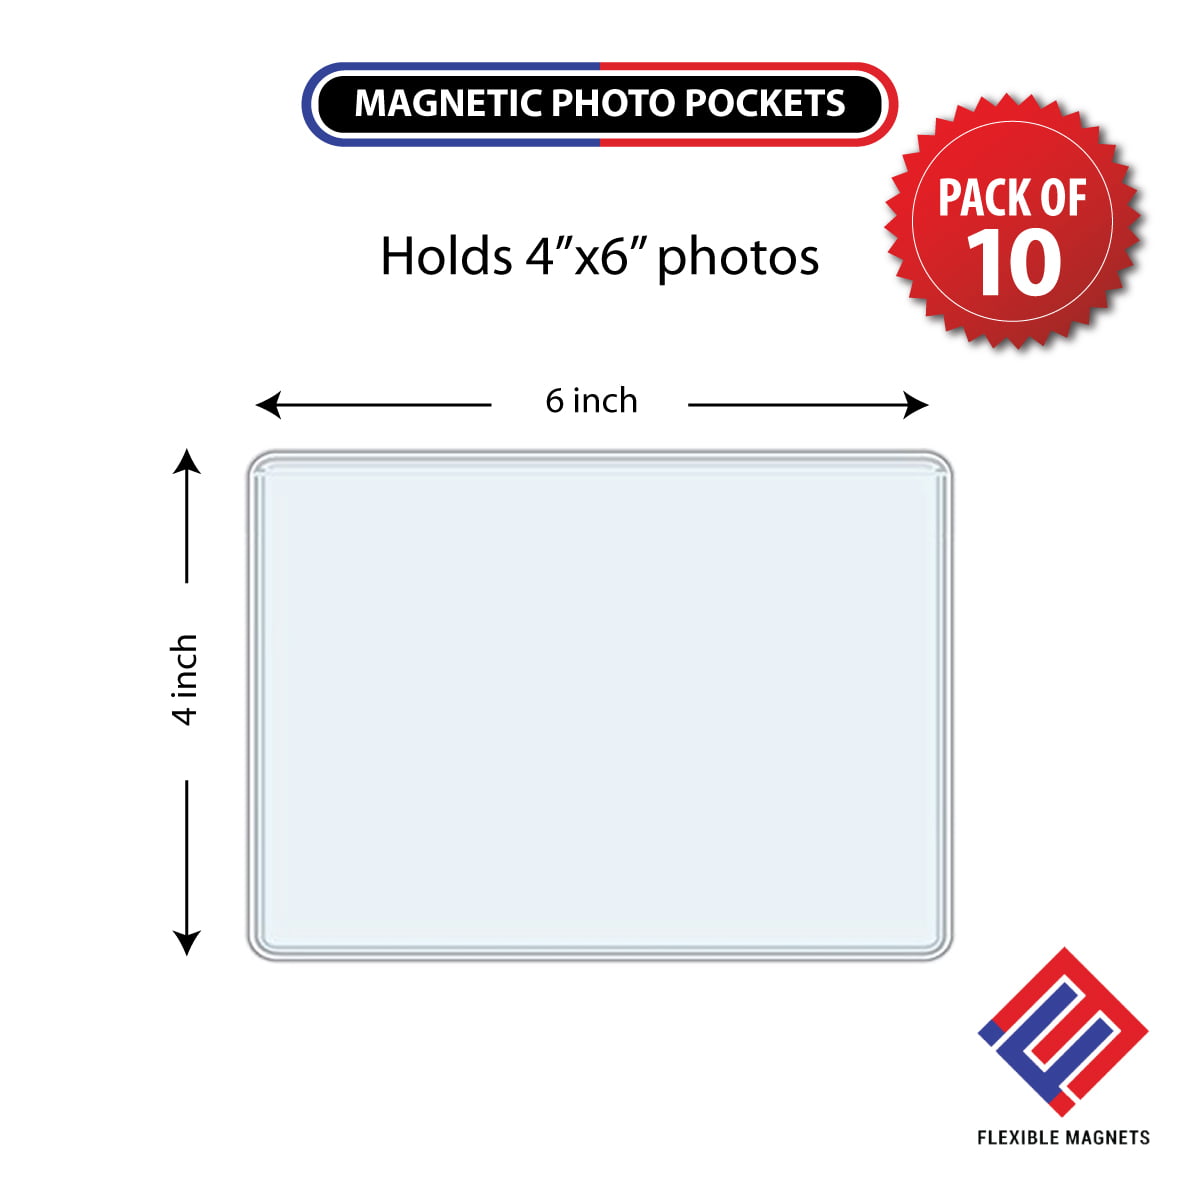  Mingting Magnetic Picture Frame, Holds 4x6 Inches Pictures,  Reusable White Magnet Fridge Photo Sleeves for Refrigerator, Locker,Office  Cabinet (White, 6)